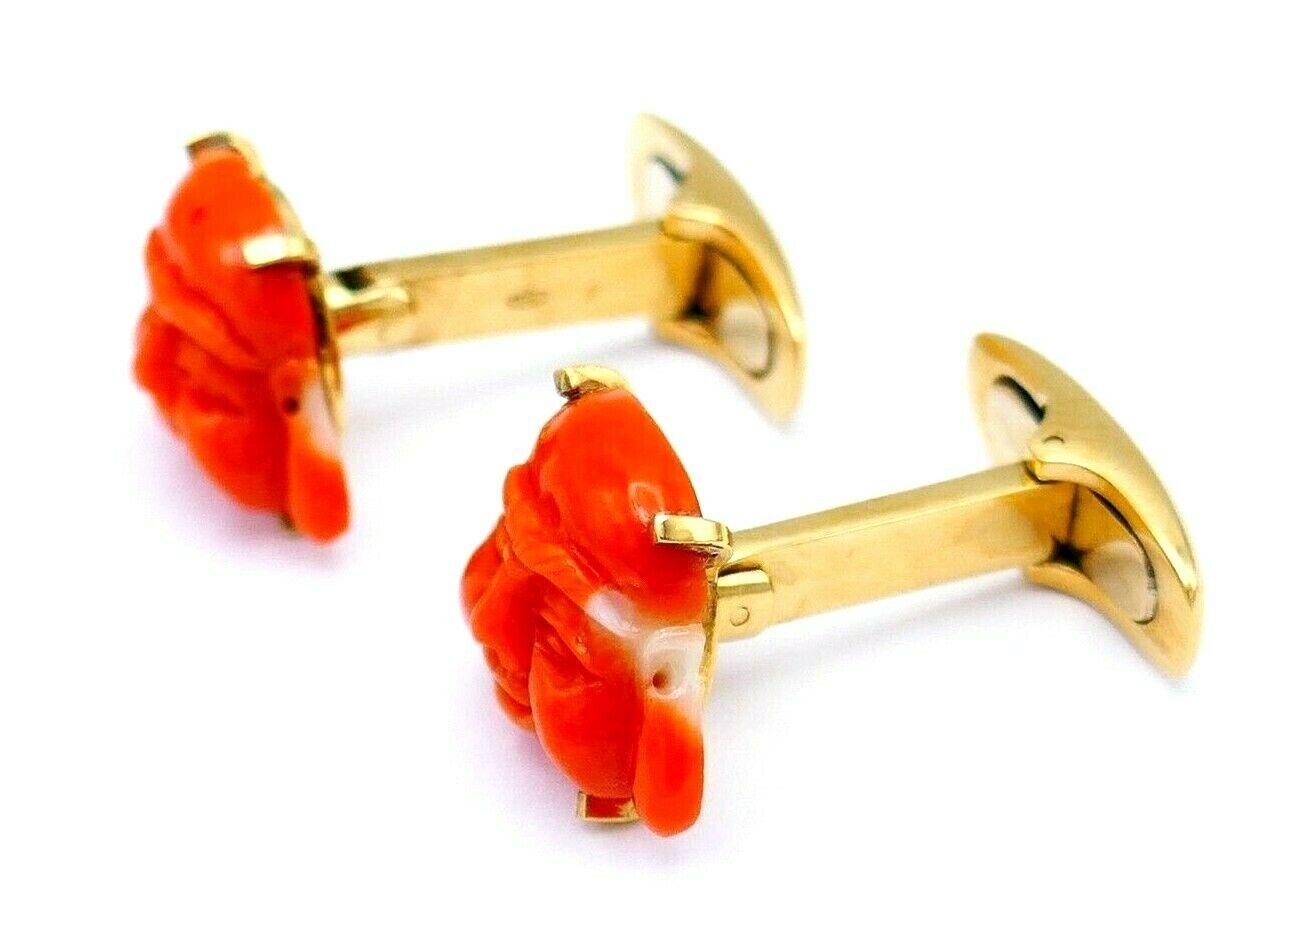 A pair of vintage cufflinks made of 18k yellow gold and carved coral depicting the laughing Buddha which is considered as a symbol of happiness and abundance. Stamped with a hallmark for 18k gold and a maker's mark.
Measurements: 5/8